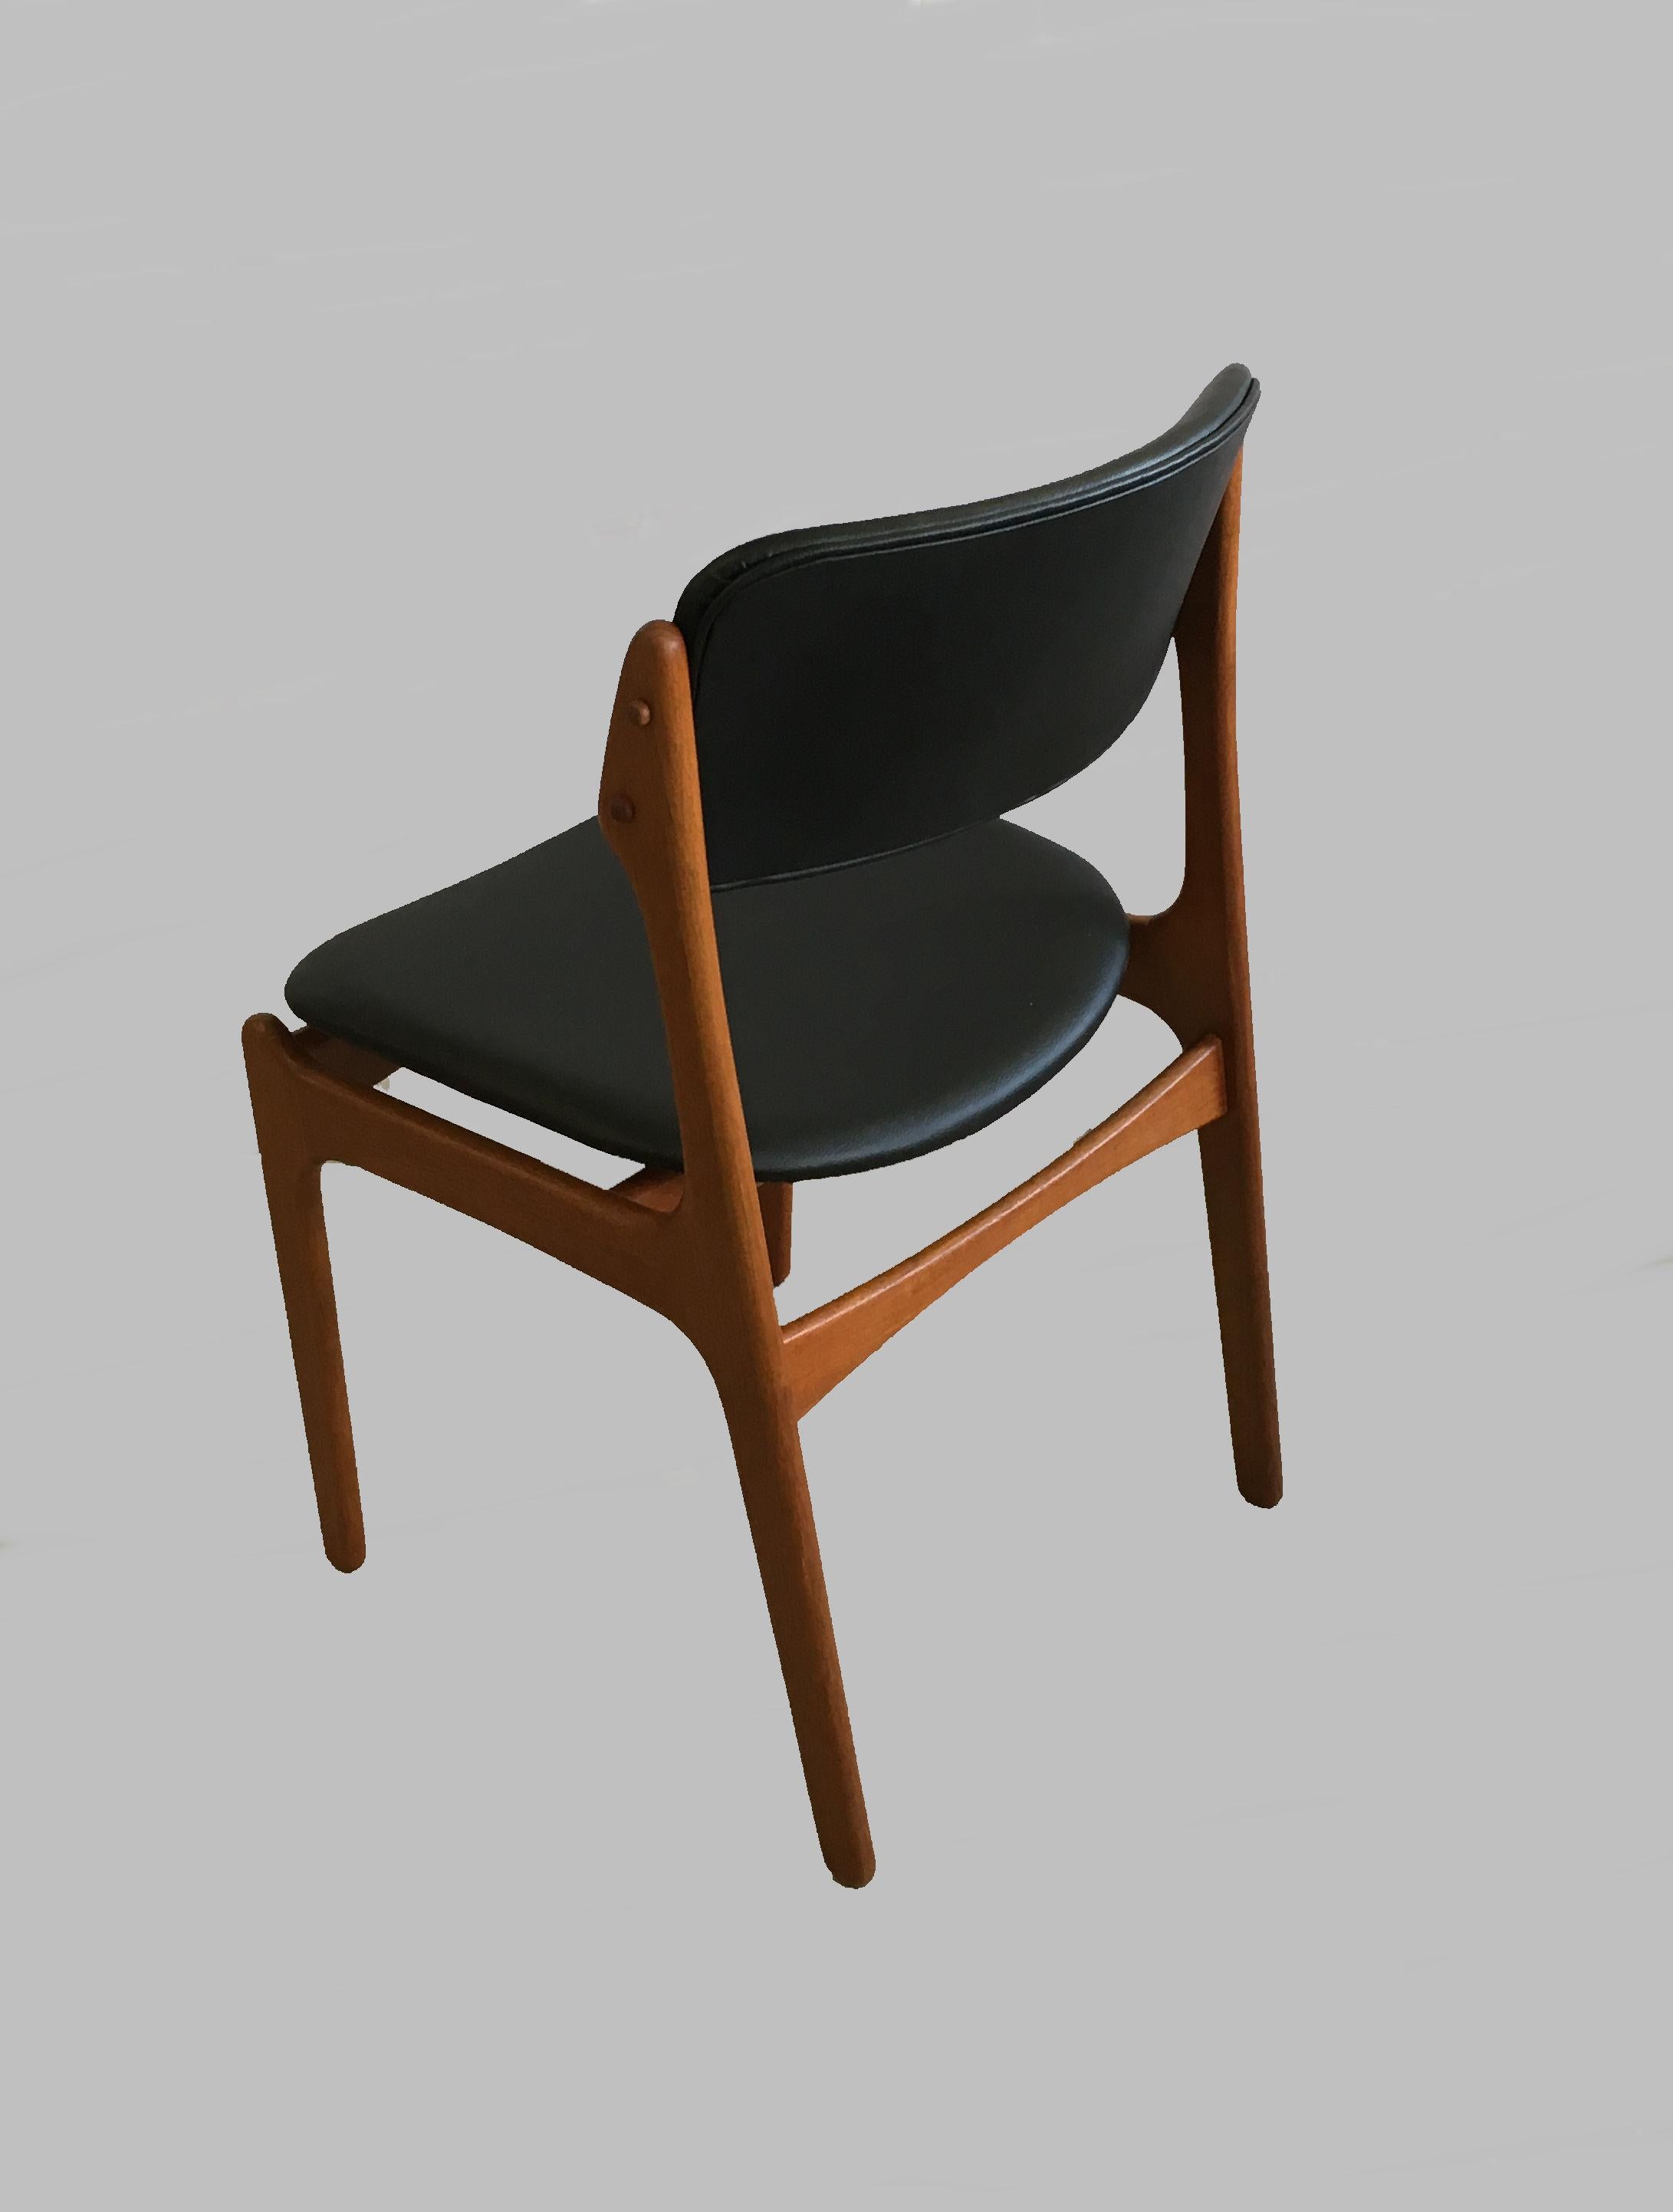 Danish Six Fully Restored Erik Buch Teak Dining Chairs, Reupholstered in Black Leather